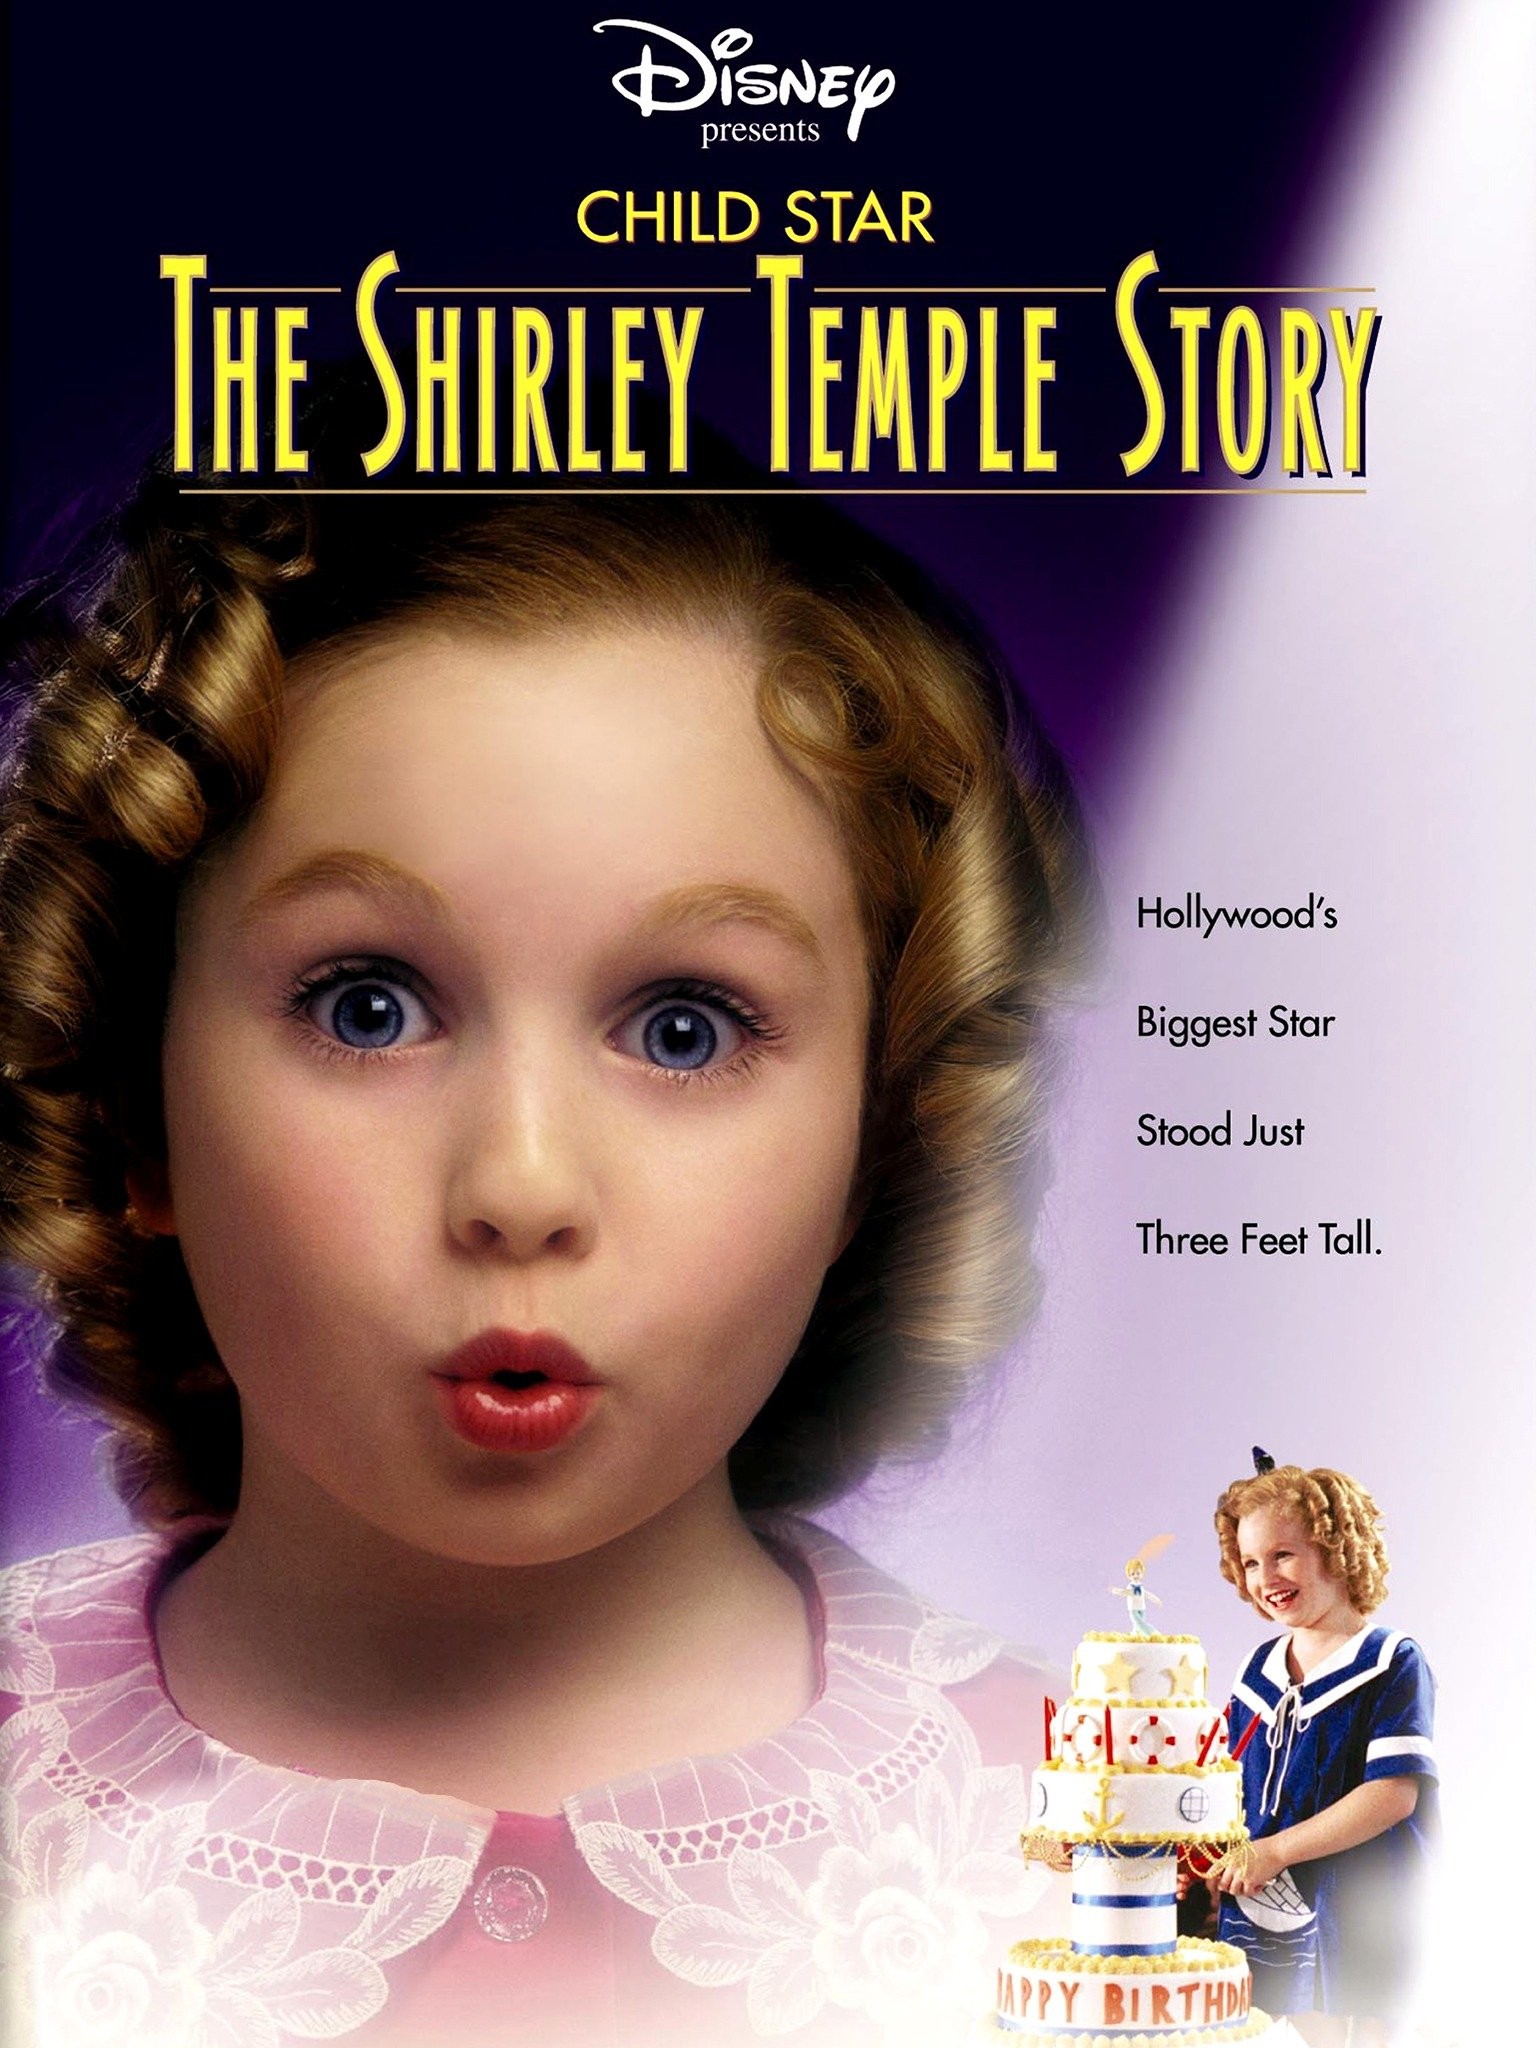 shirley temple teenager color